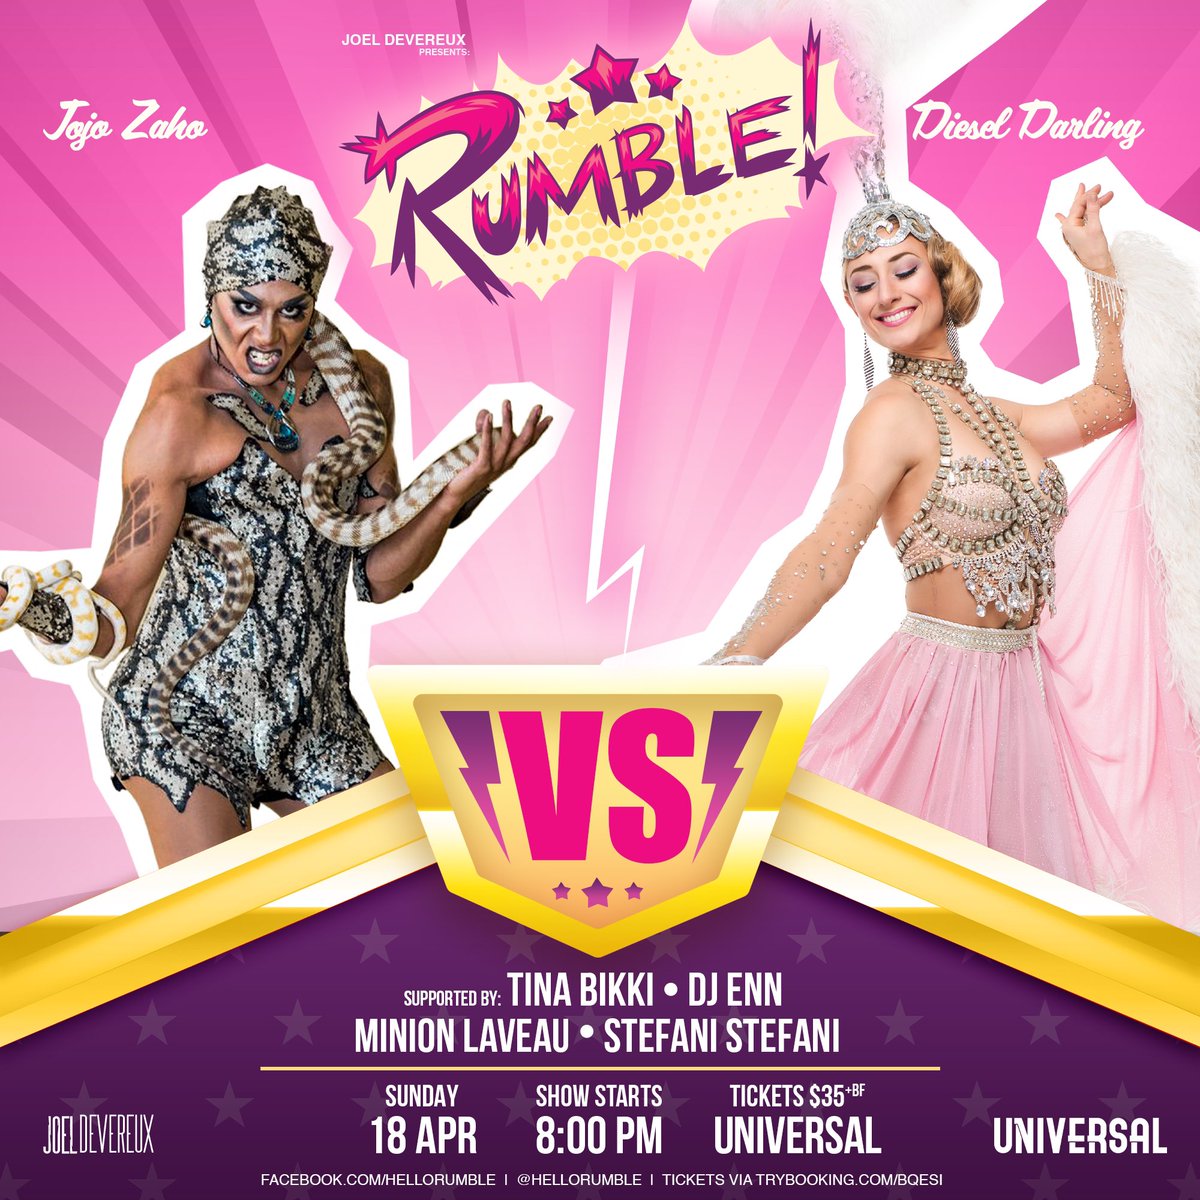 SYDNEY! I’m bringing my show RUMBLE to Universal this Sunday. Come along it’s gonna be camp 🥰

RUMBLE! [SYD] - Jojo Zaho VS Diesel Darling

Tickets available via Trybooking
(18+): trybooking.com/BQESI